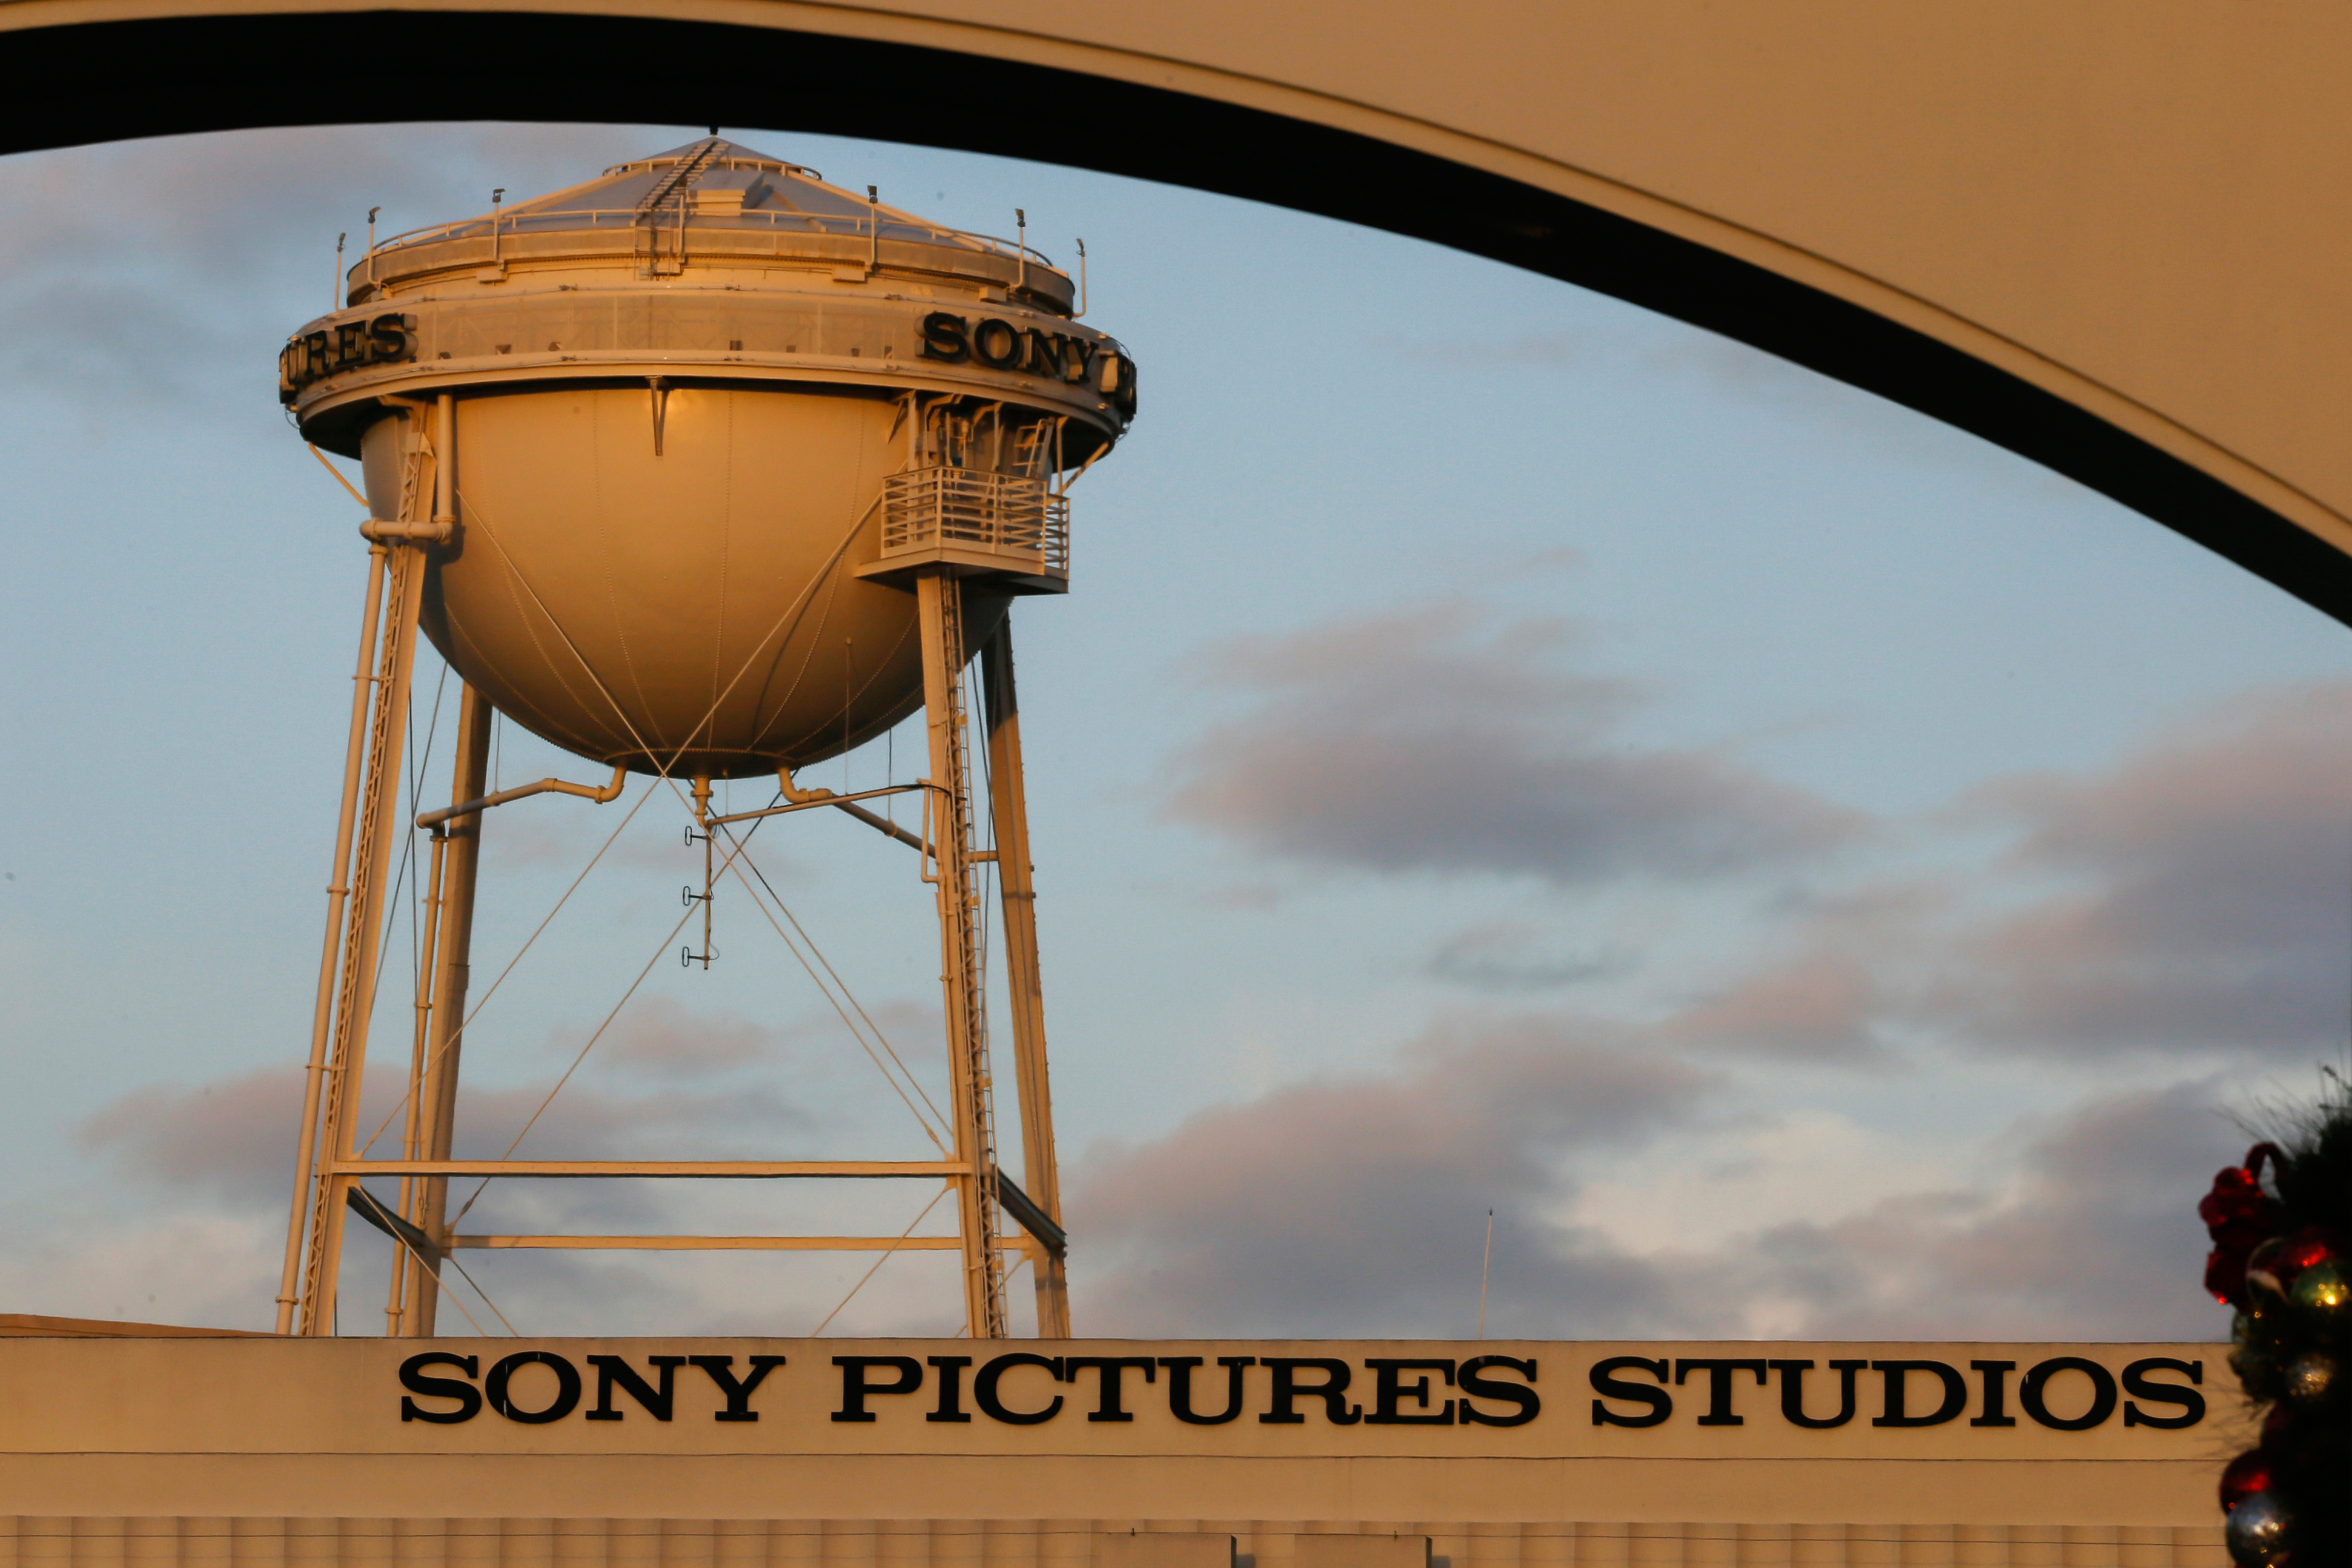 The water tower at the Sony Pictures Entertainment Inc. studios in Culver City, California.